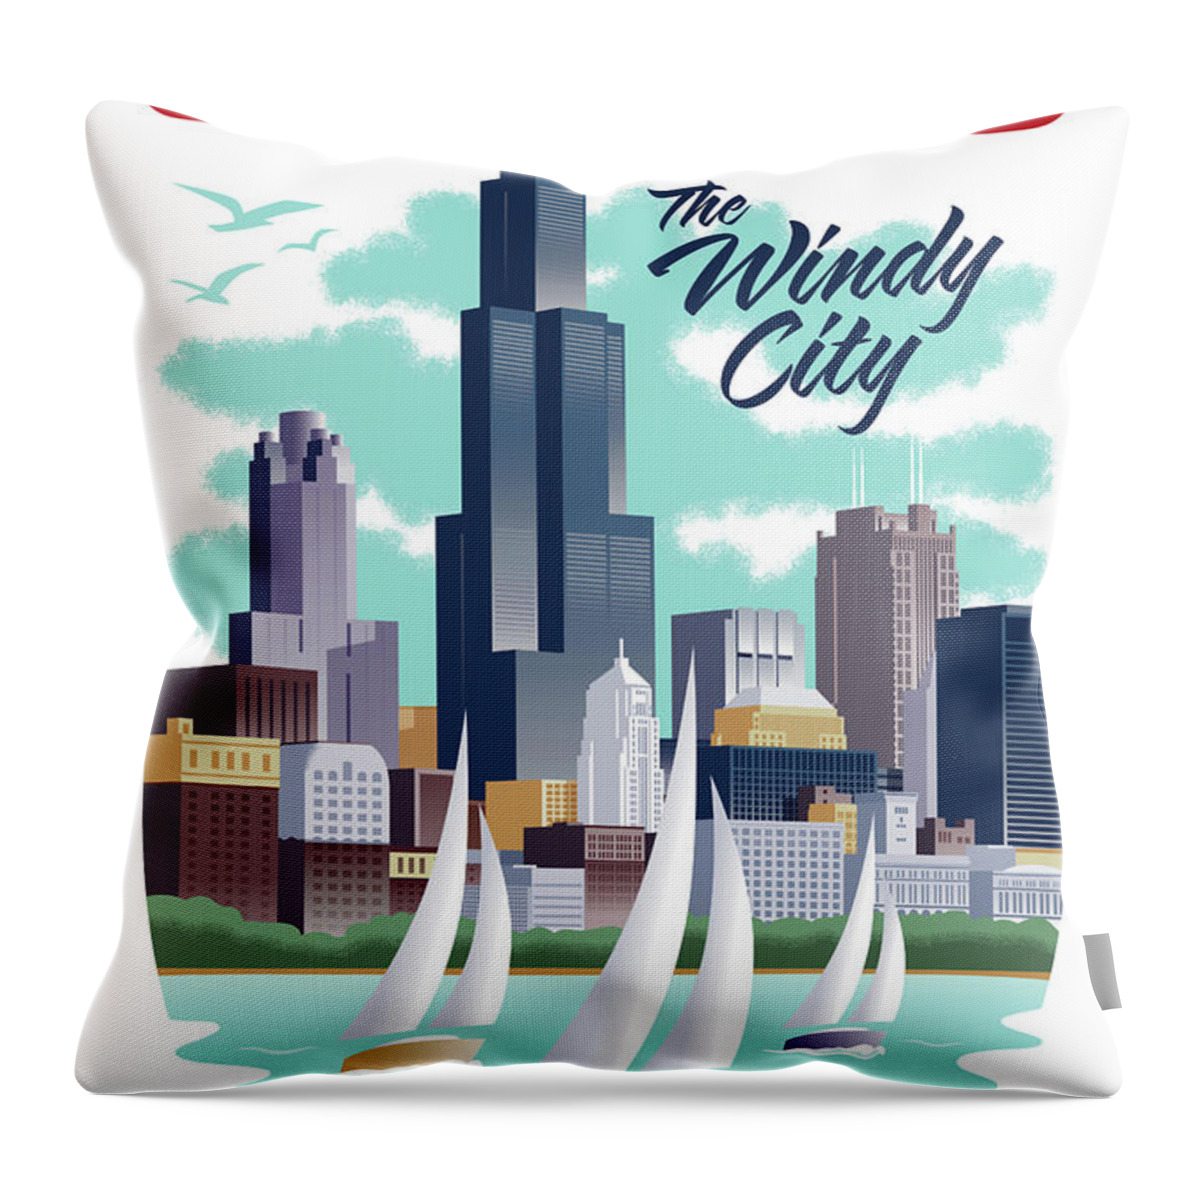 Travel Poster Throw Pillow featuring the digital art Chicago Poster - Vintage Travel by Jim Zahniser